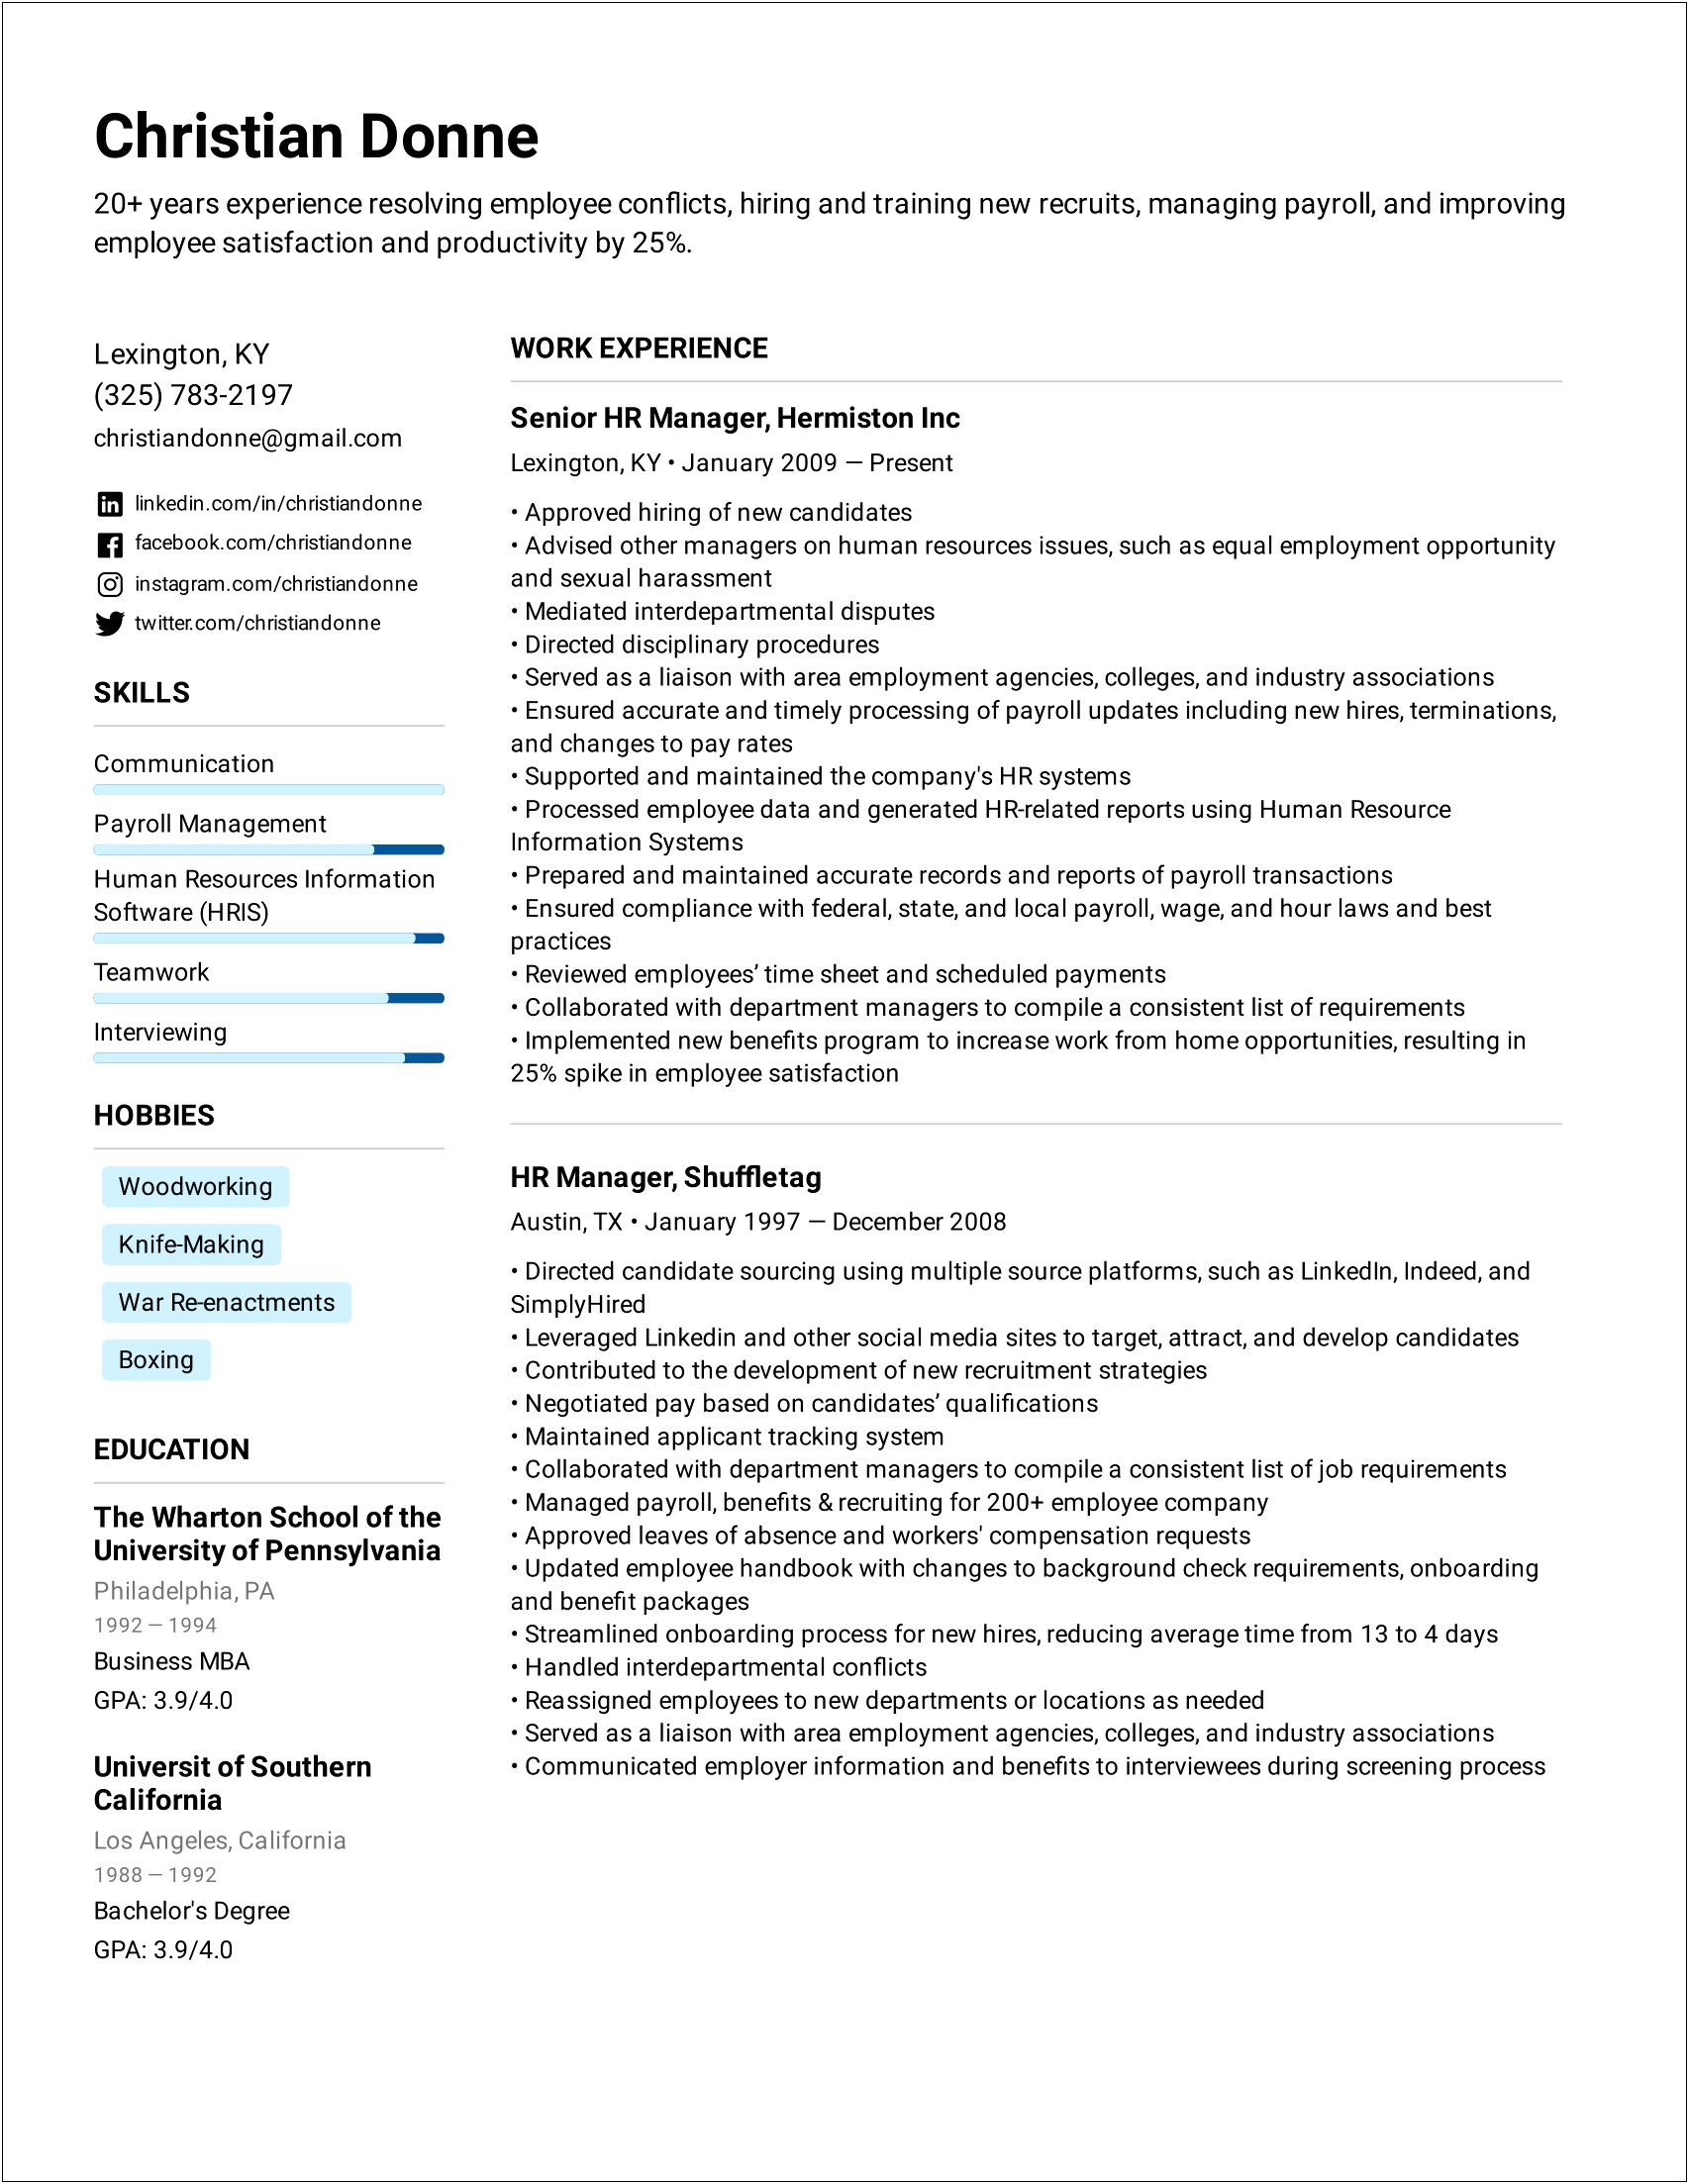 Samples Of Resumes For Hr Professionals